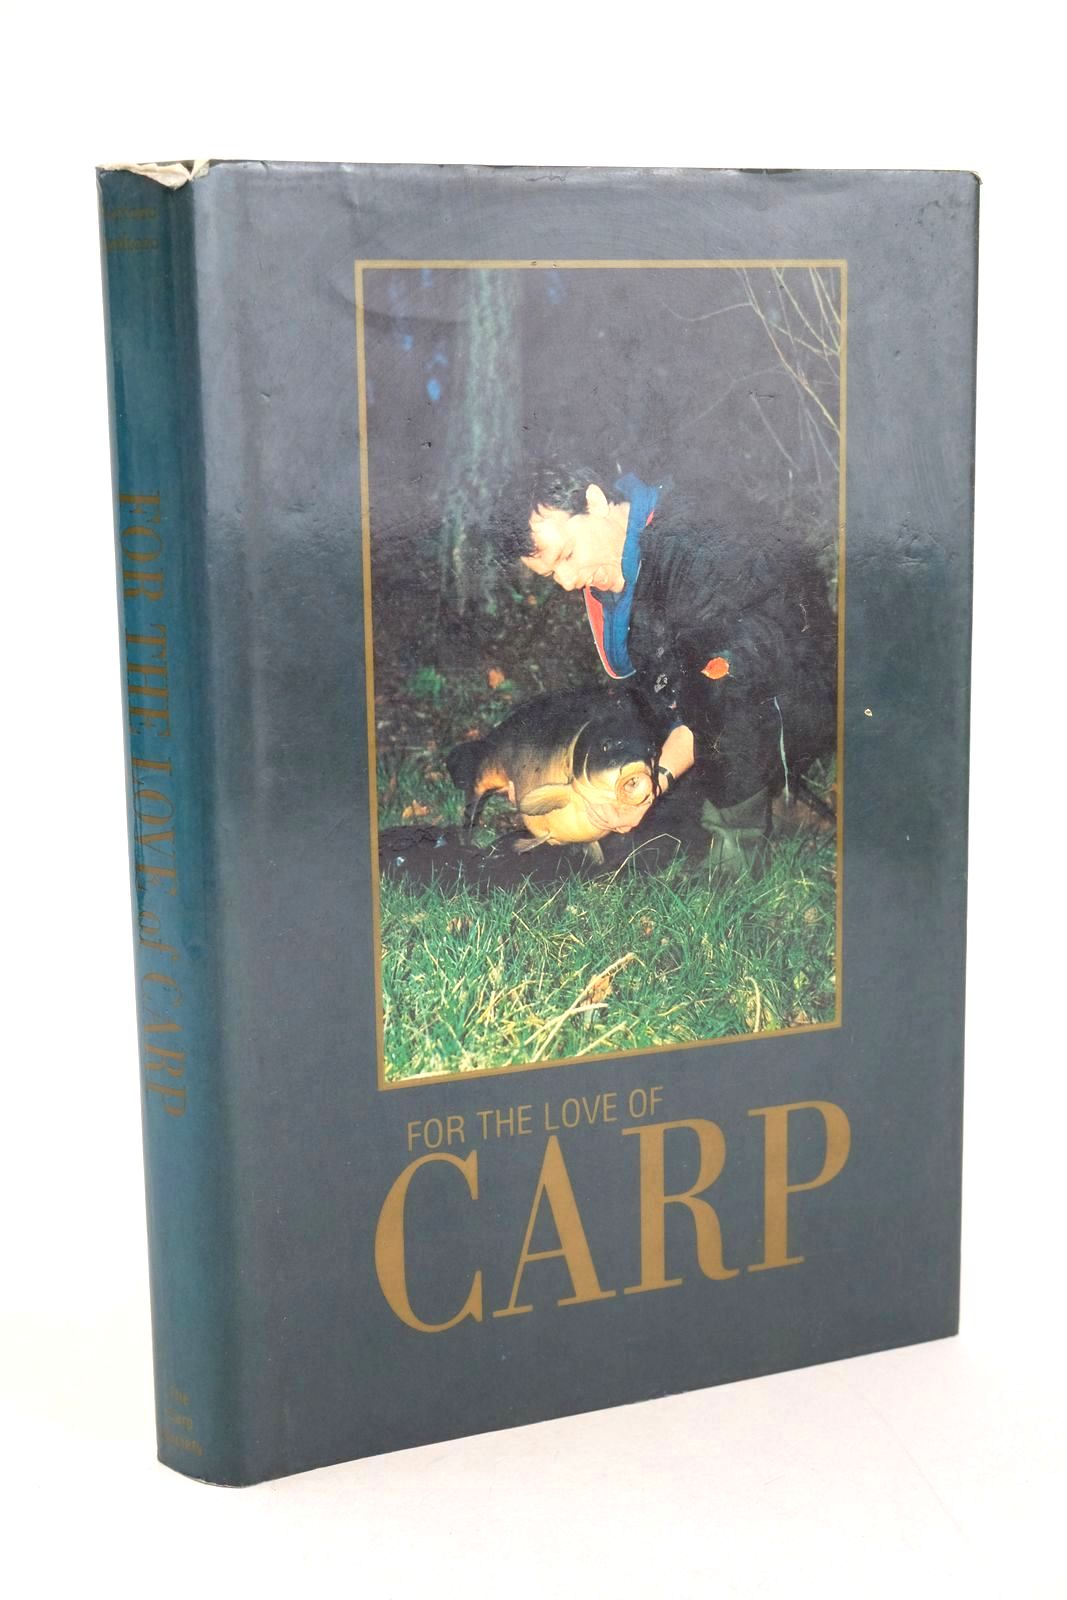 Photo of FOR THE LOVE OF CARP written by Various, published by The Carp Society (STOCK CODE: 1327566)  for sale by Stella & Rose's Books